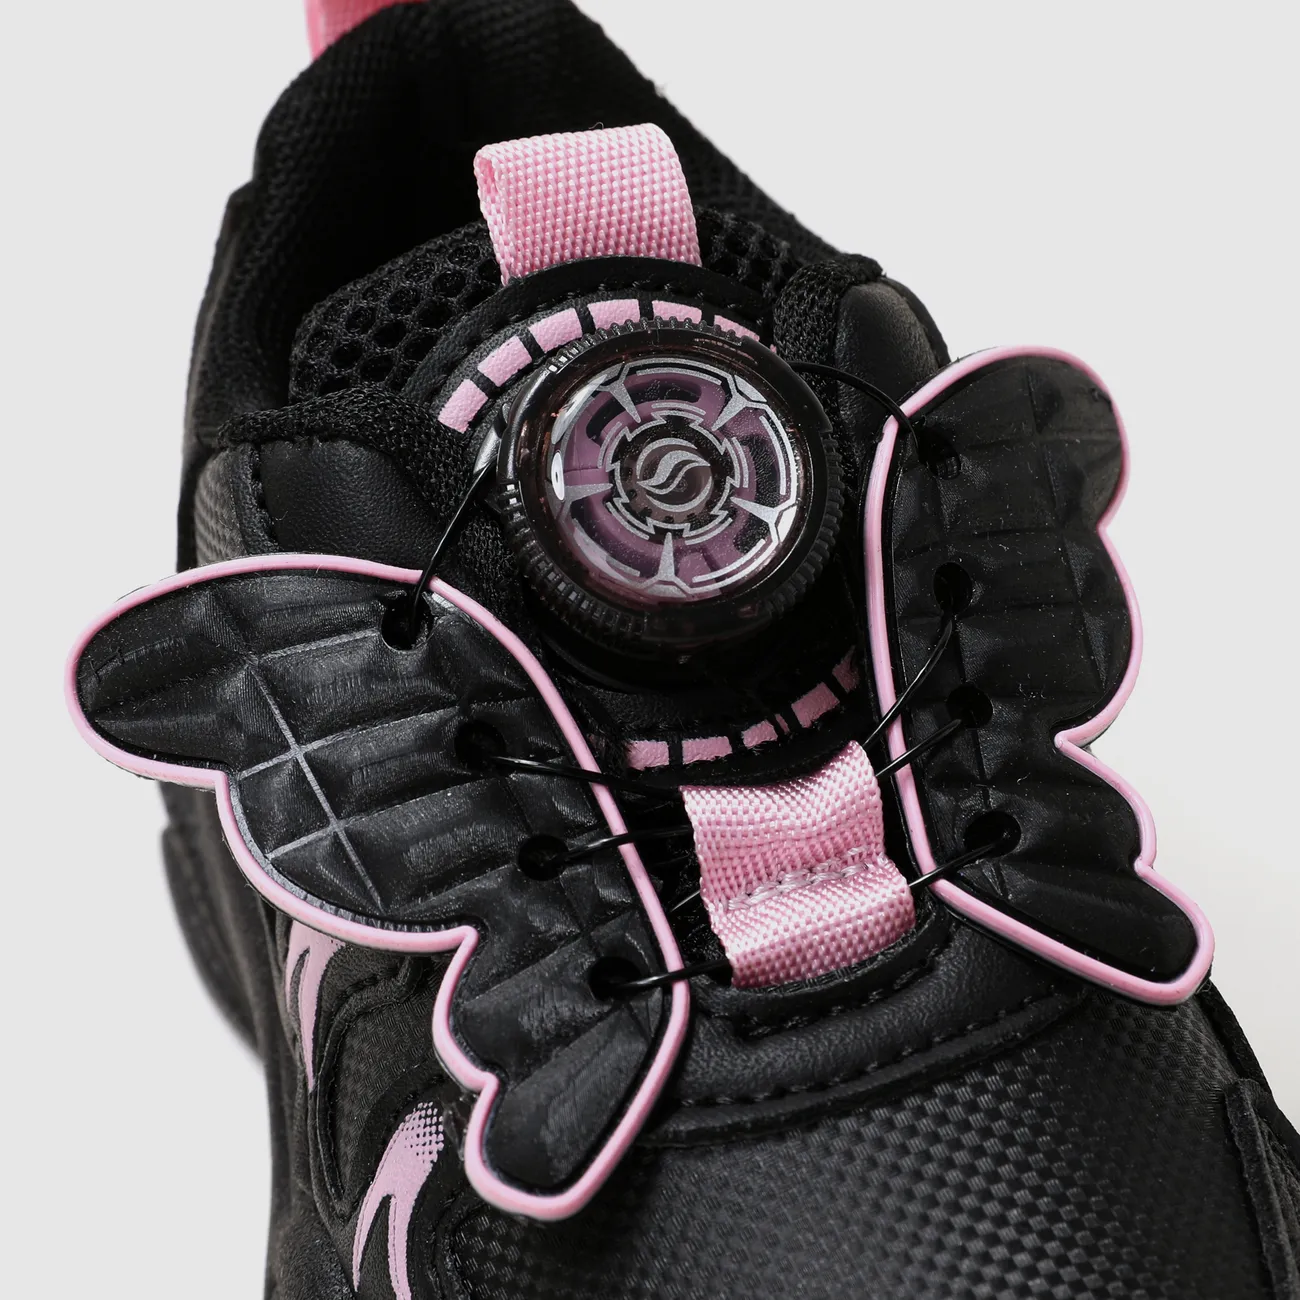 Kids Girl 3D Hyper-Tactile Butterfly Design Rotating Button Sports Shoes Black big image 1